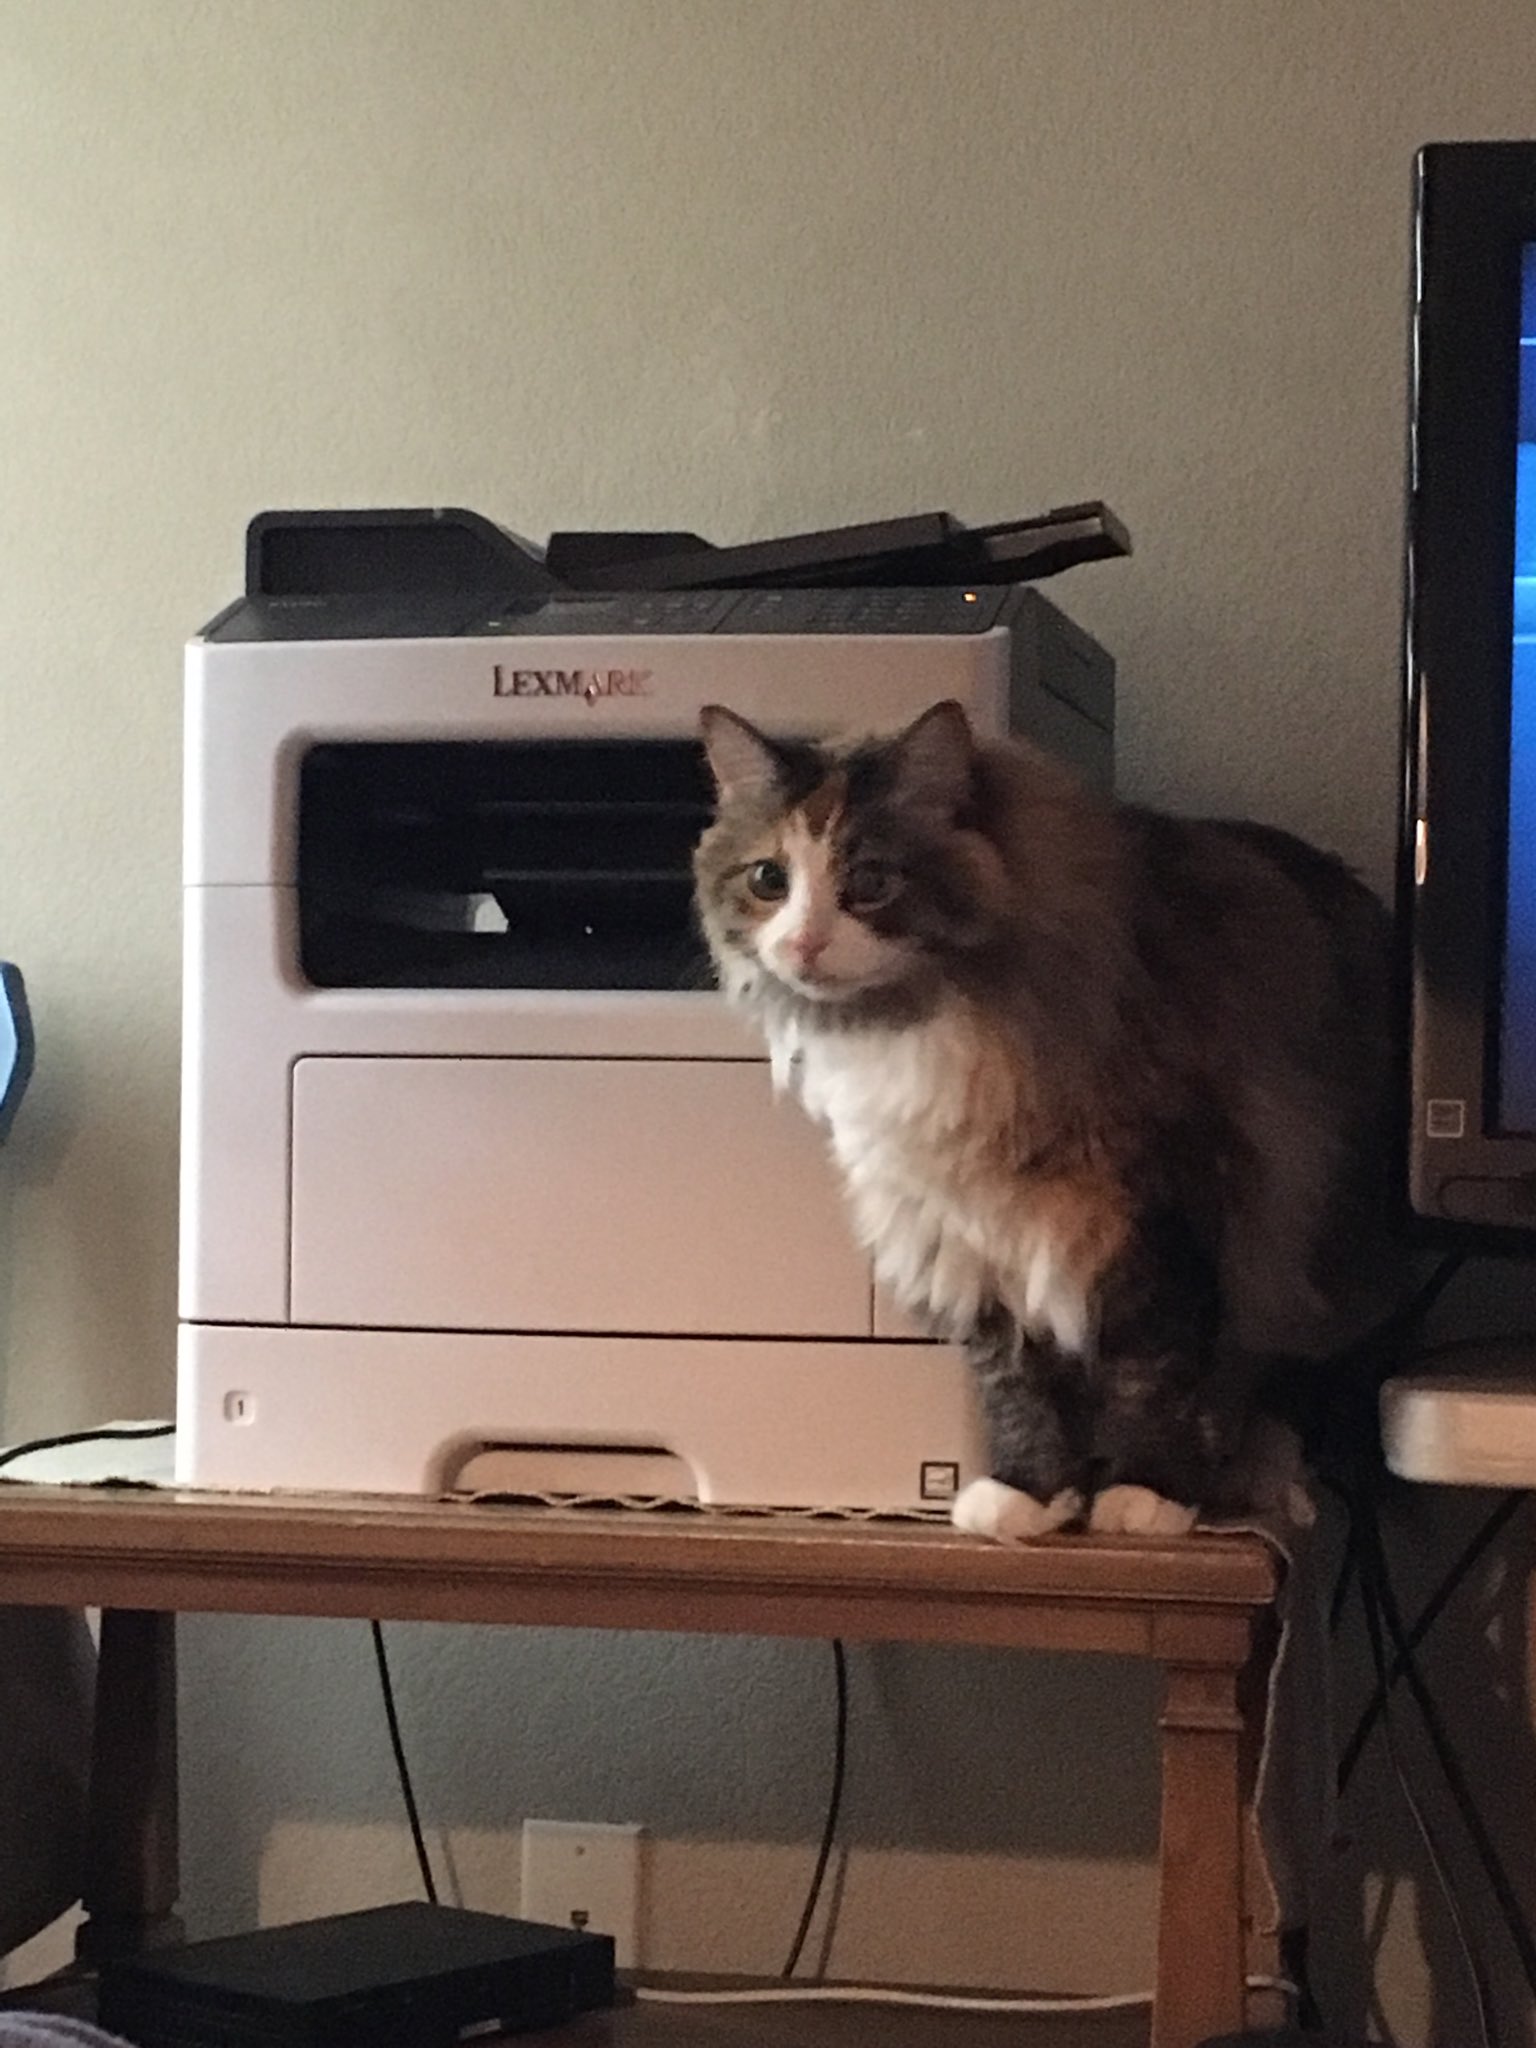 jubilæum Fjerde indelukke A Tall Texan on Twitter: "Pop, is this a laser printer or dot matrix?  #CatsOfTwitter #cats #catshill #catsarefamily #Meow #MeowMonday  #kittyloafmonday #kitty #CatRadio #kittycat #catlovers #catlover #catlife  https://t.co/IjlxpZE741" / Twitter